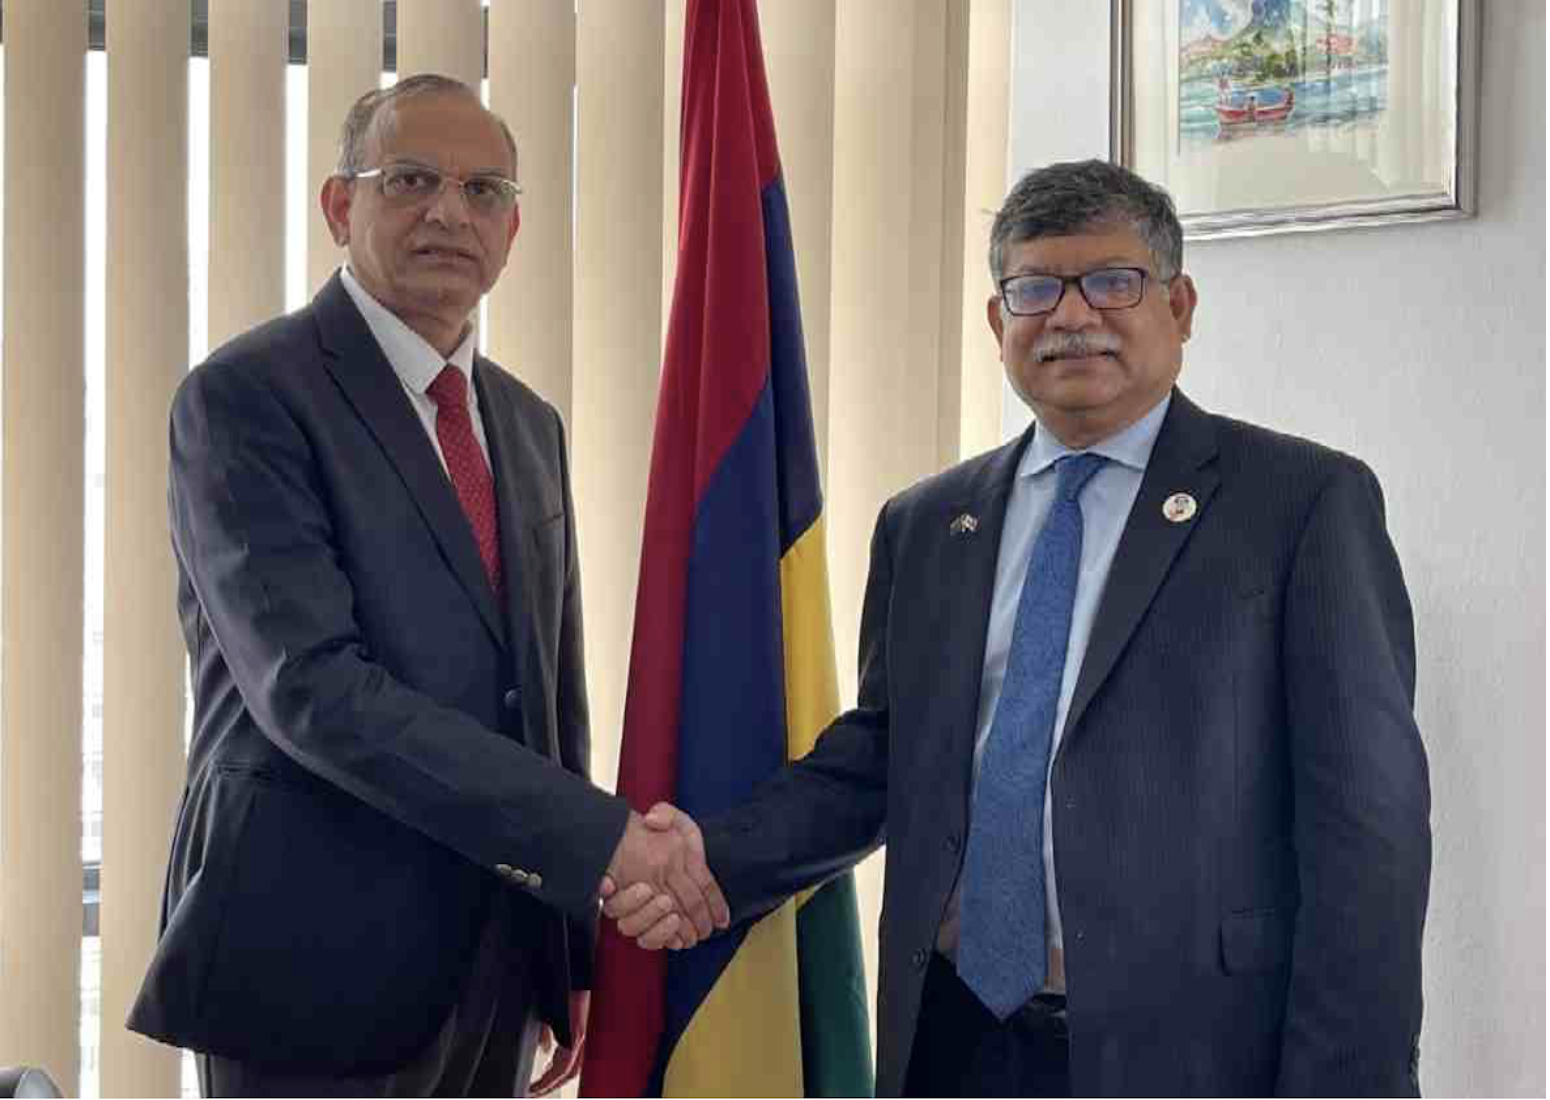 Bangladesh Foreign Secretary on island to promote trade and investment